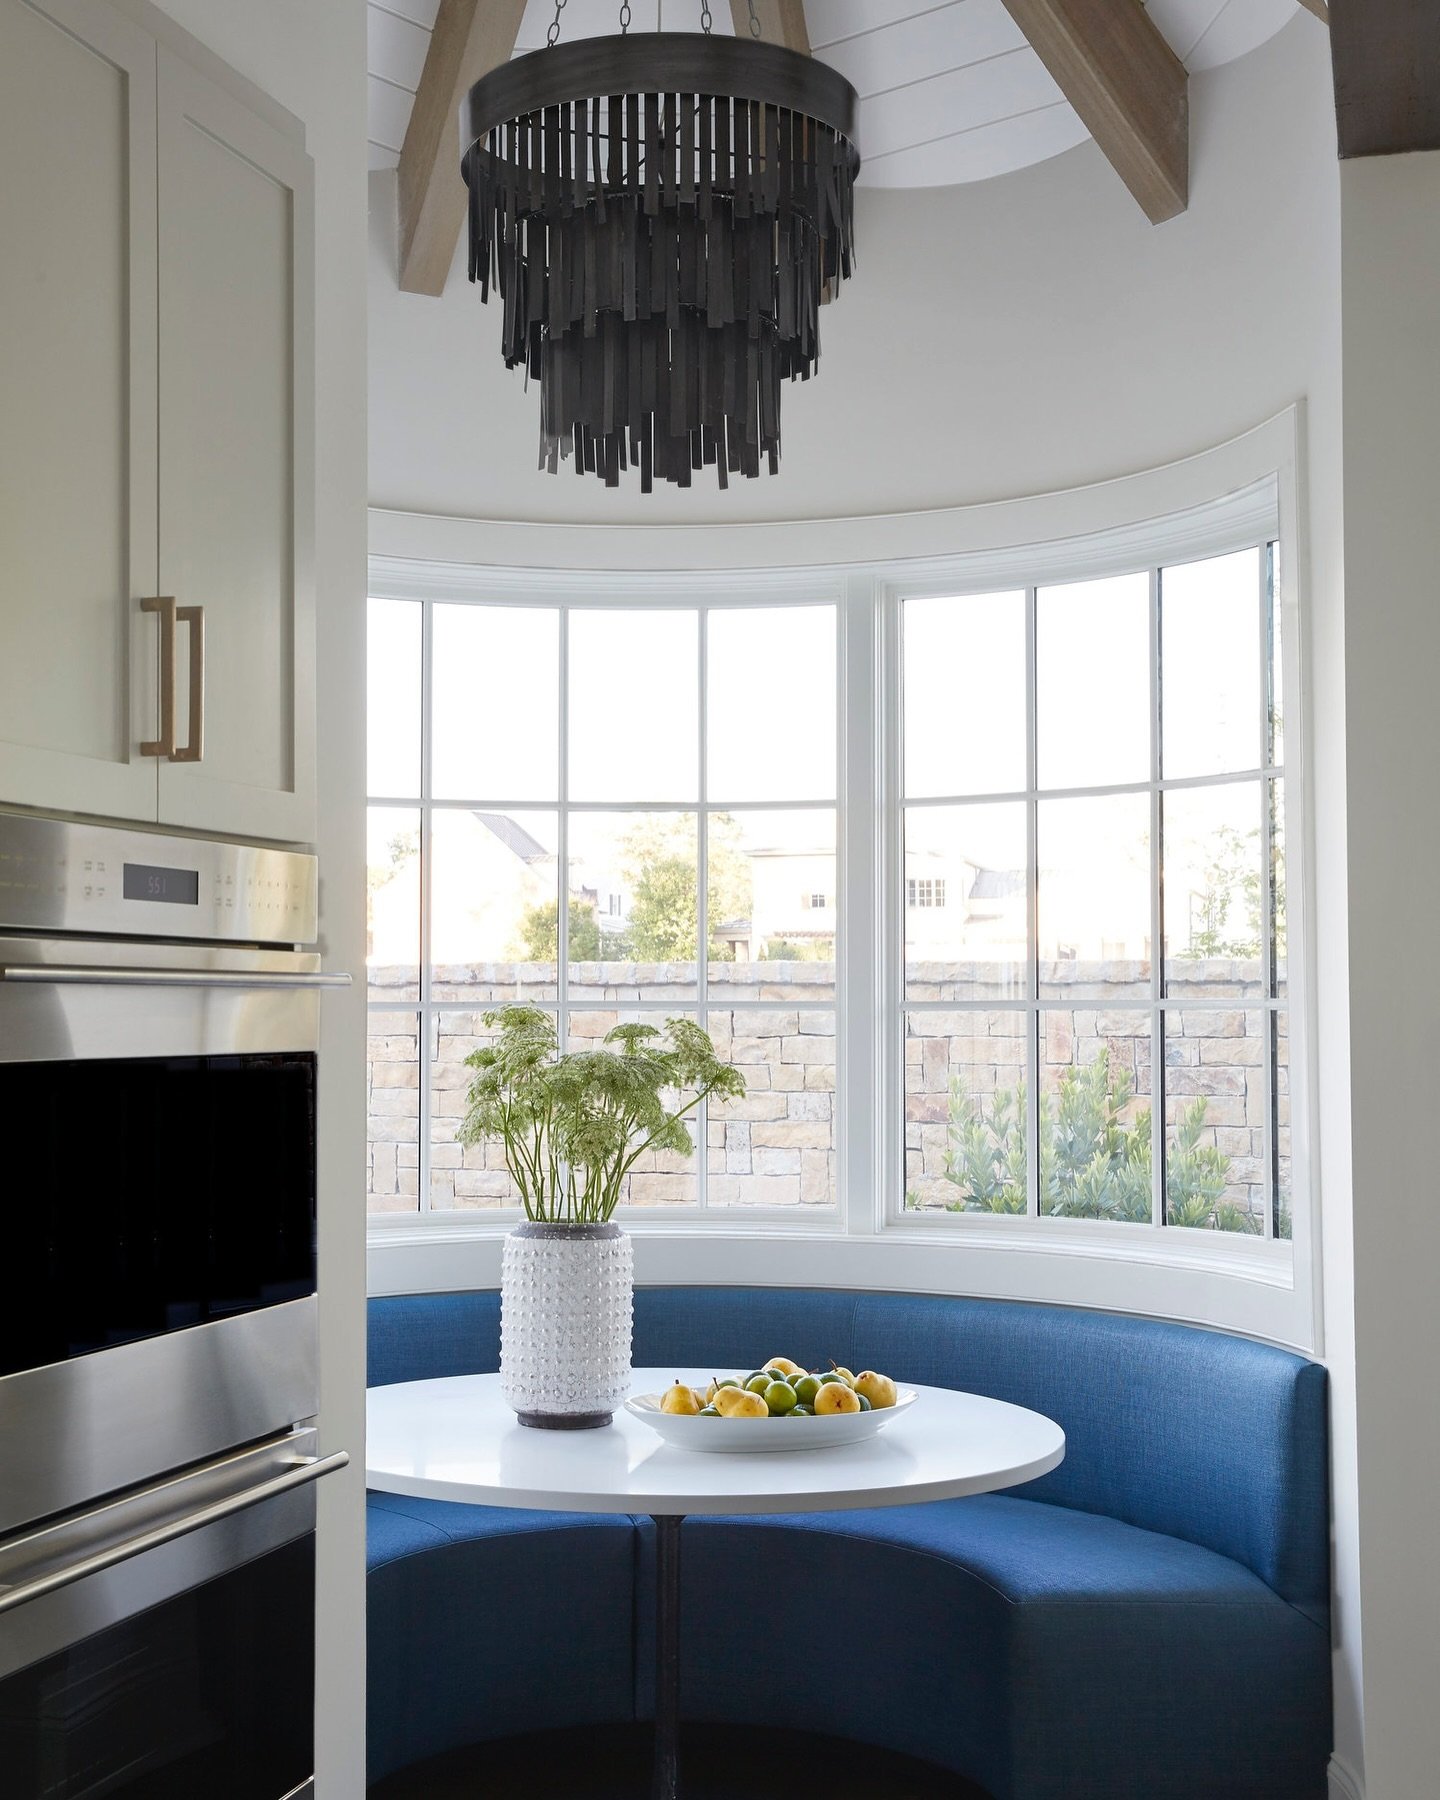 Statement upon statement in this beautiful dining nook designed by @lindsey_s_townsend 💙

Styled by @martytsmith 
Photographed by @jallsopp

#interiordesign #kitchendesign #summerhousestyle